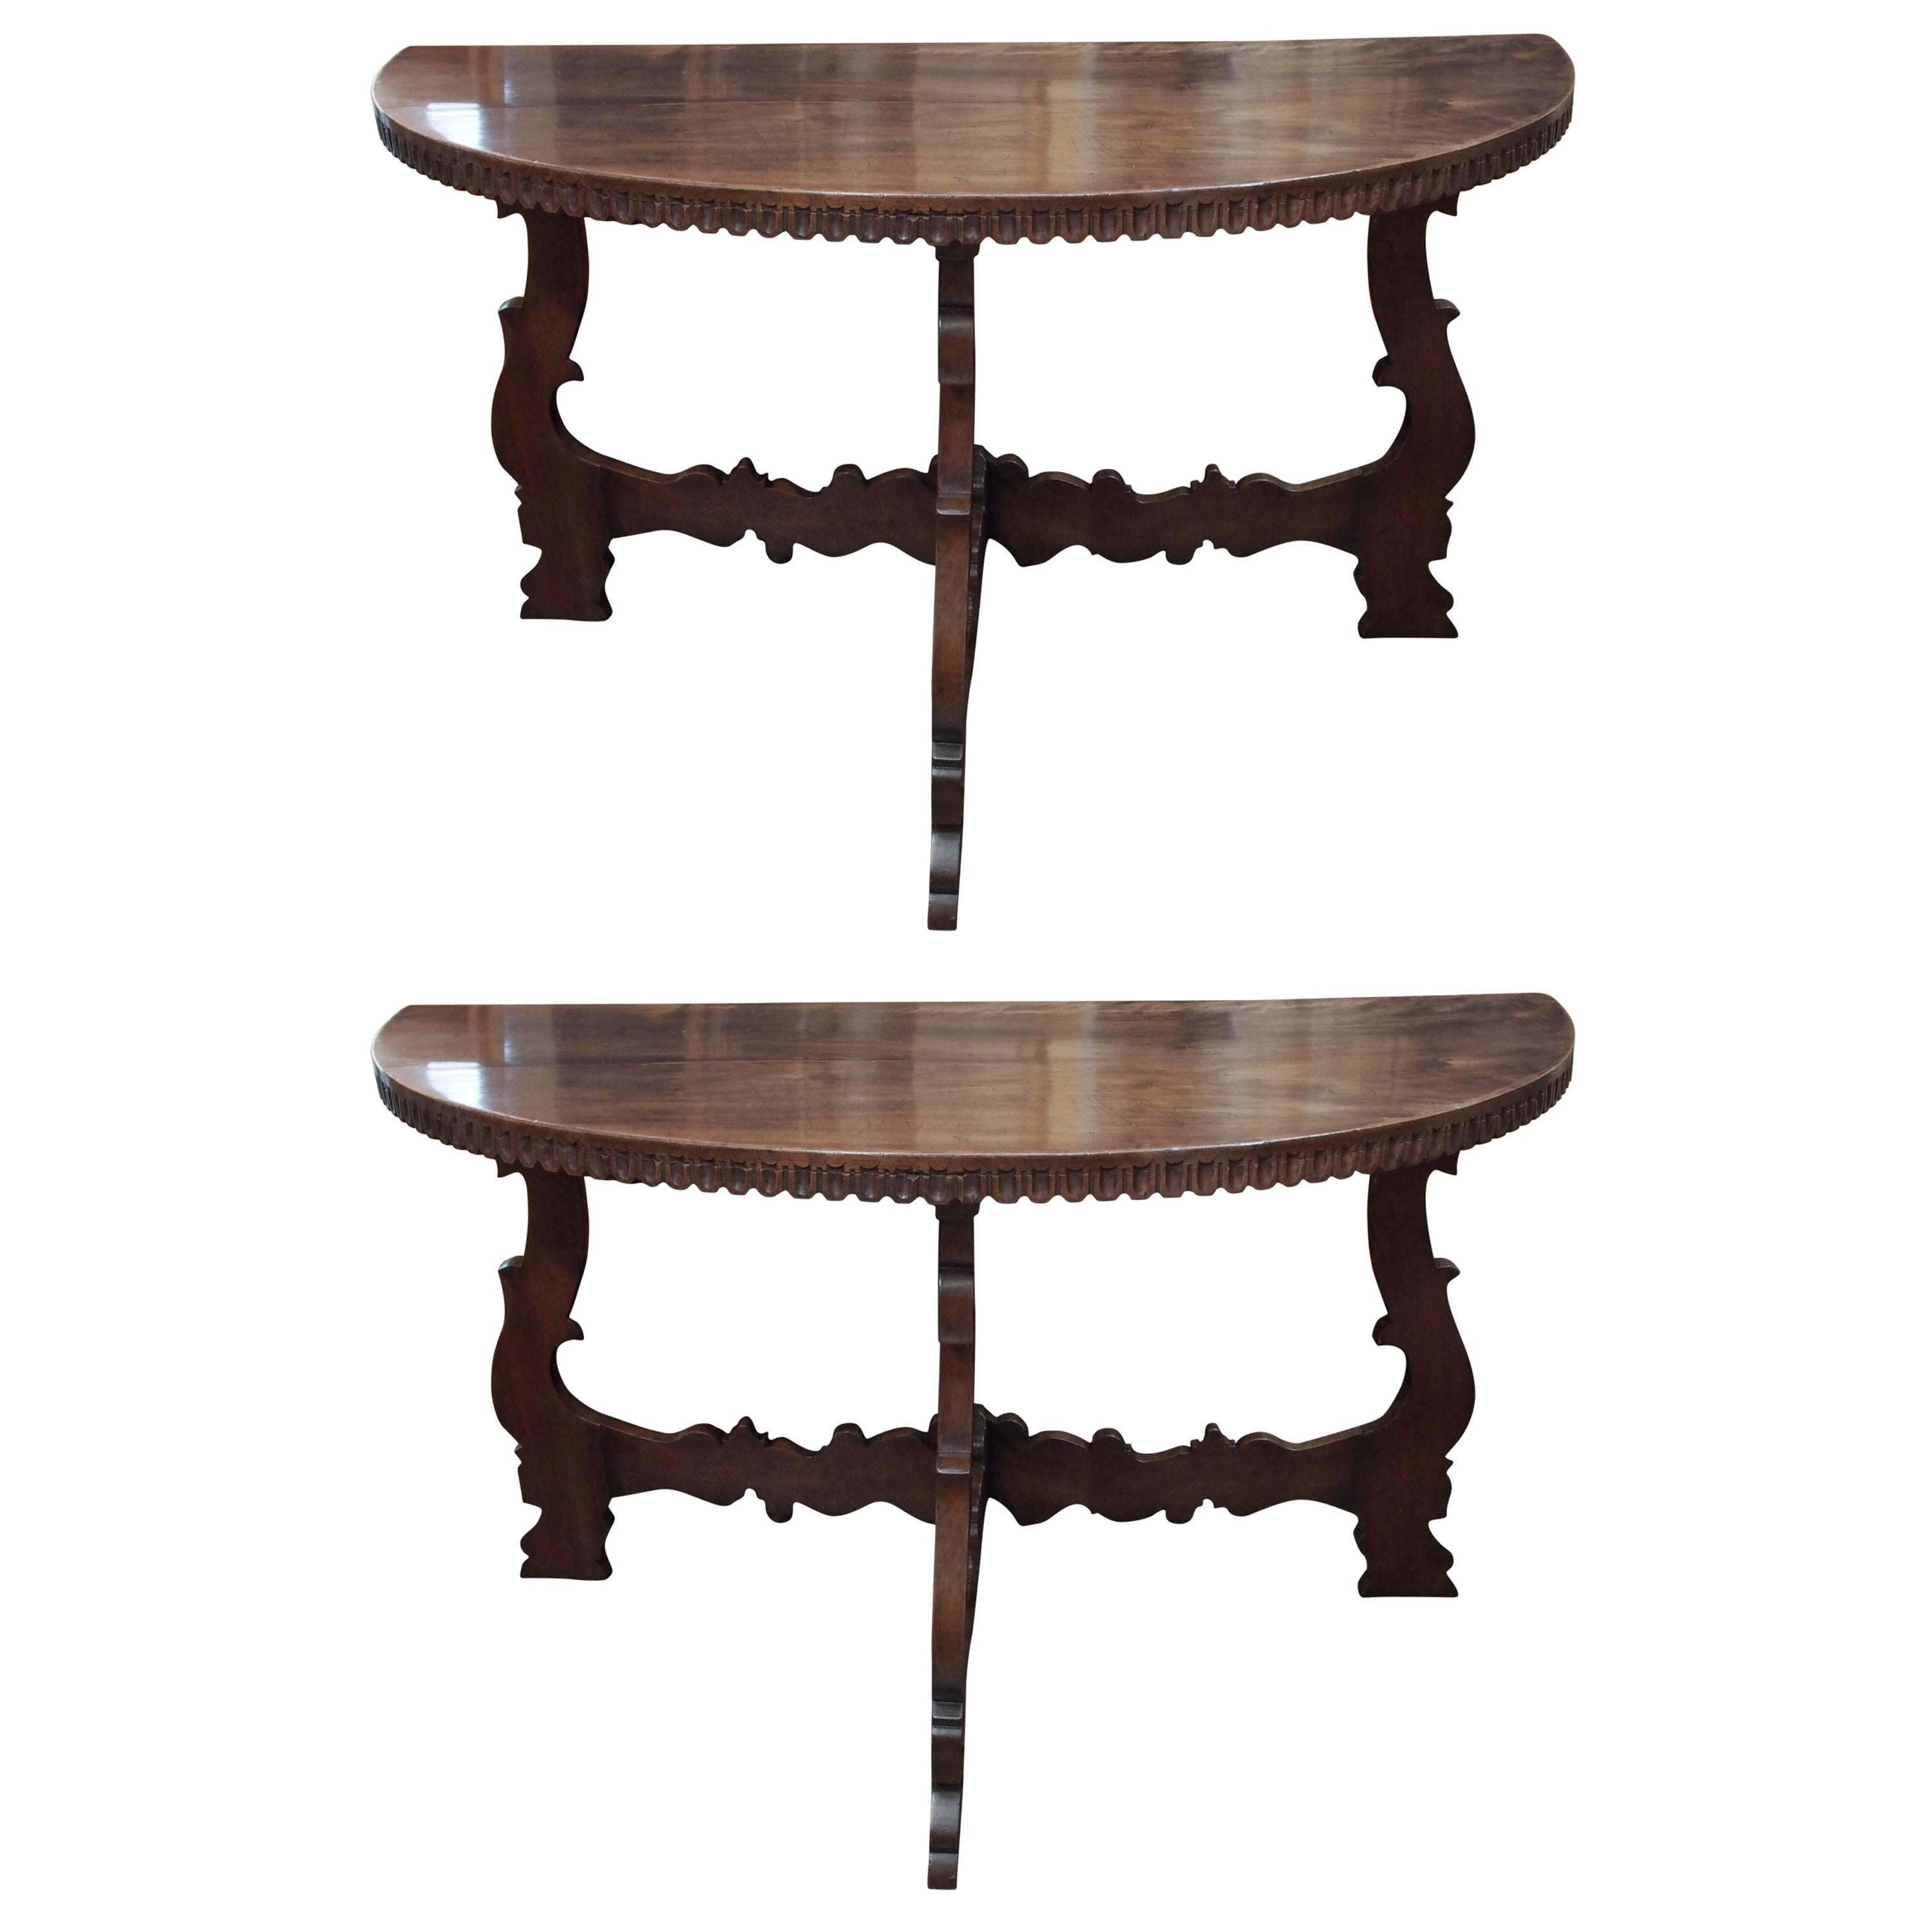 Pair of Walnut Demilune Console Tables, Italian, 18th Century For Sale